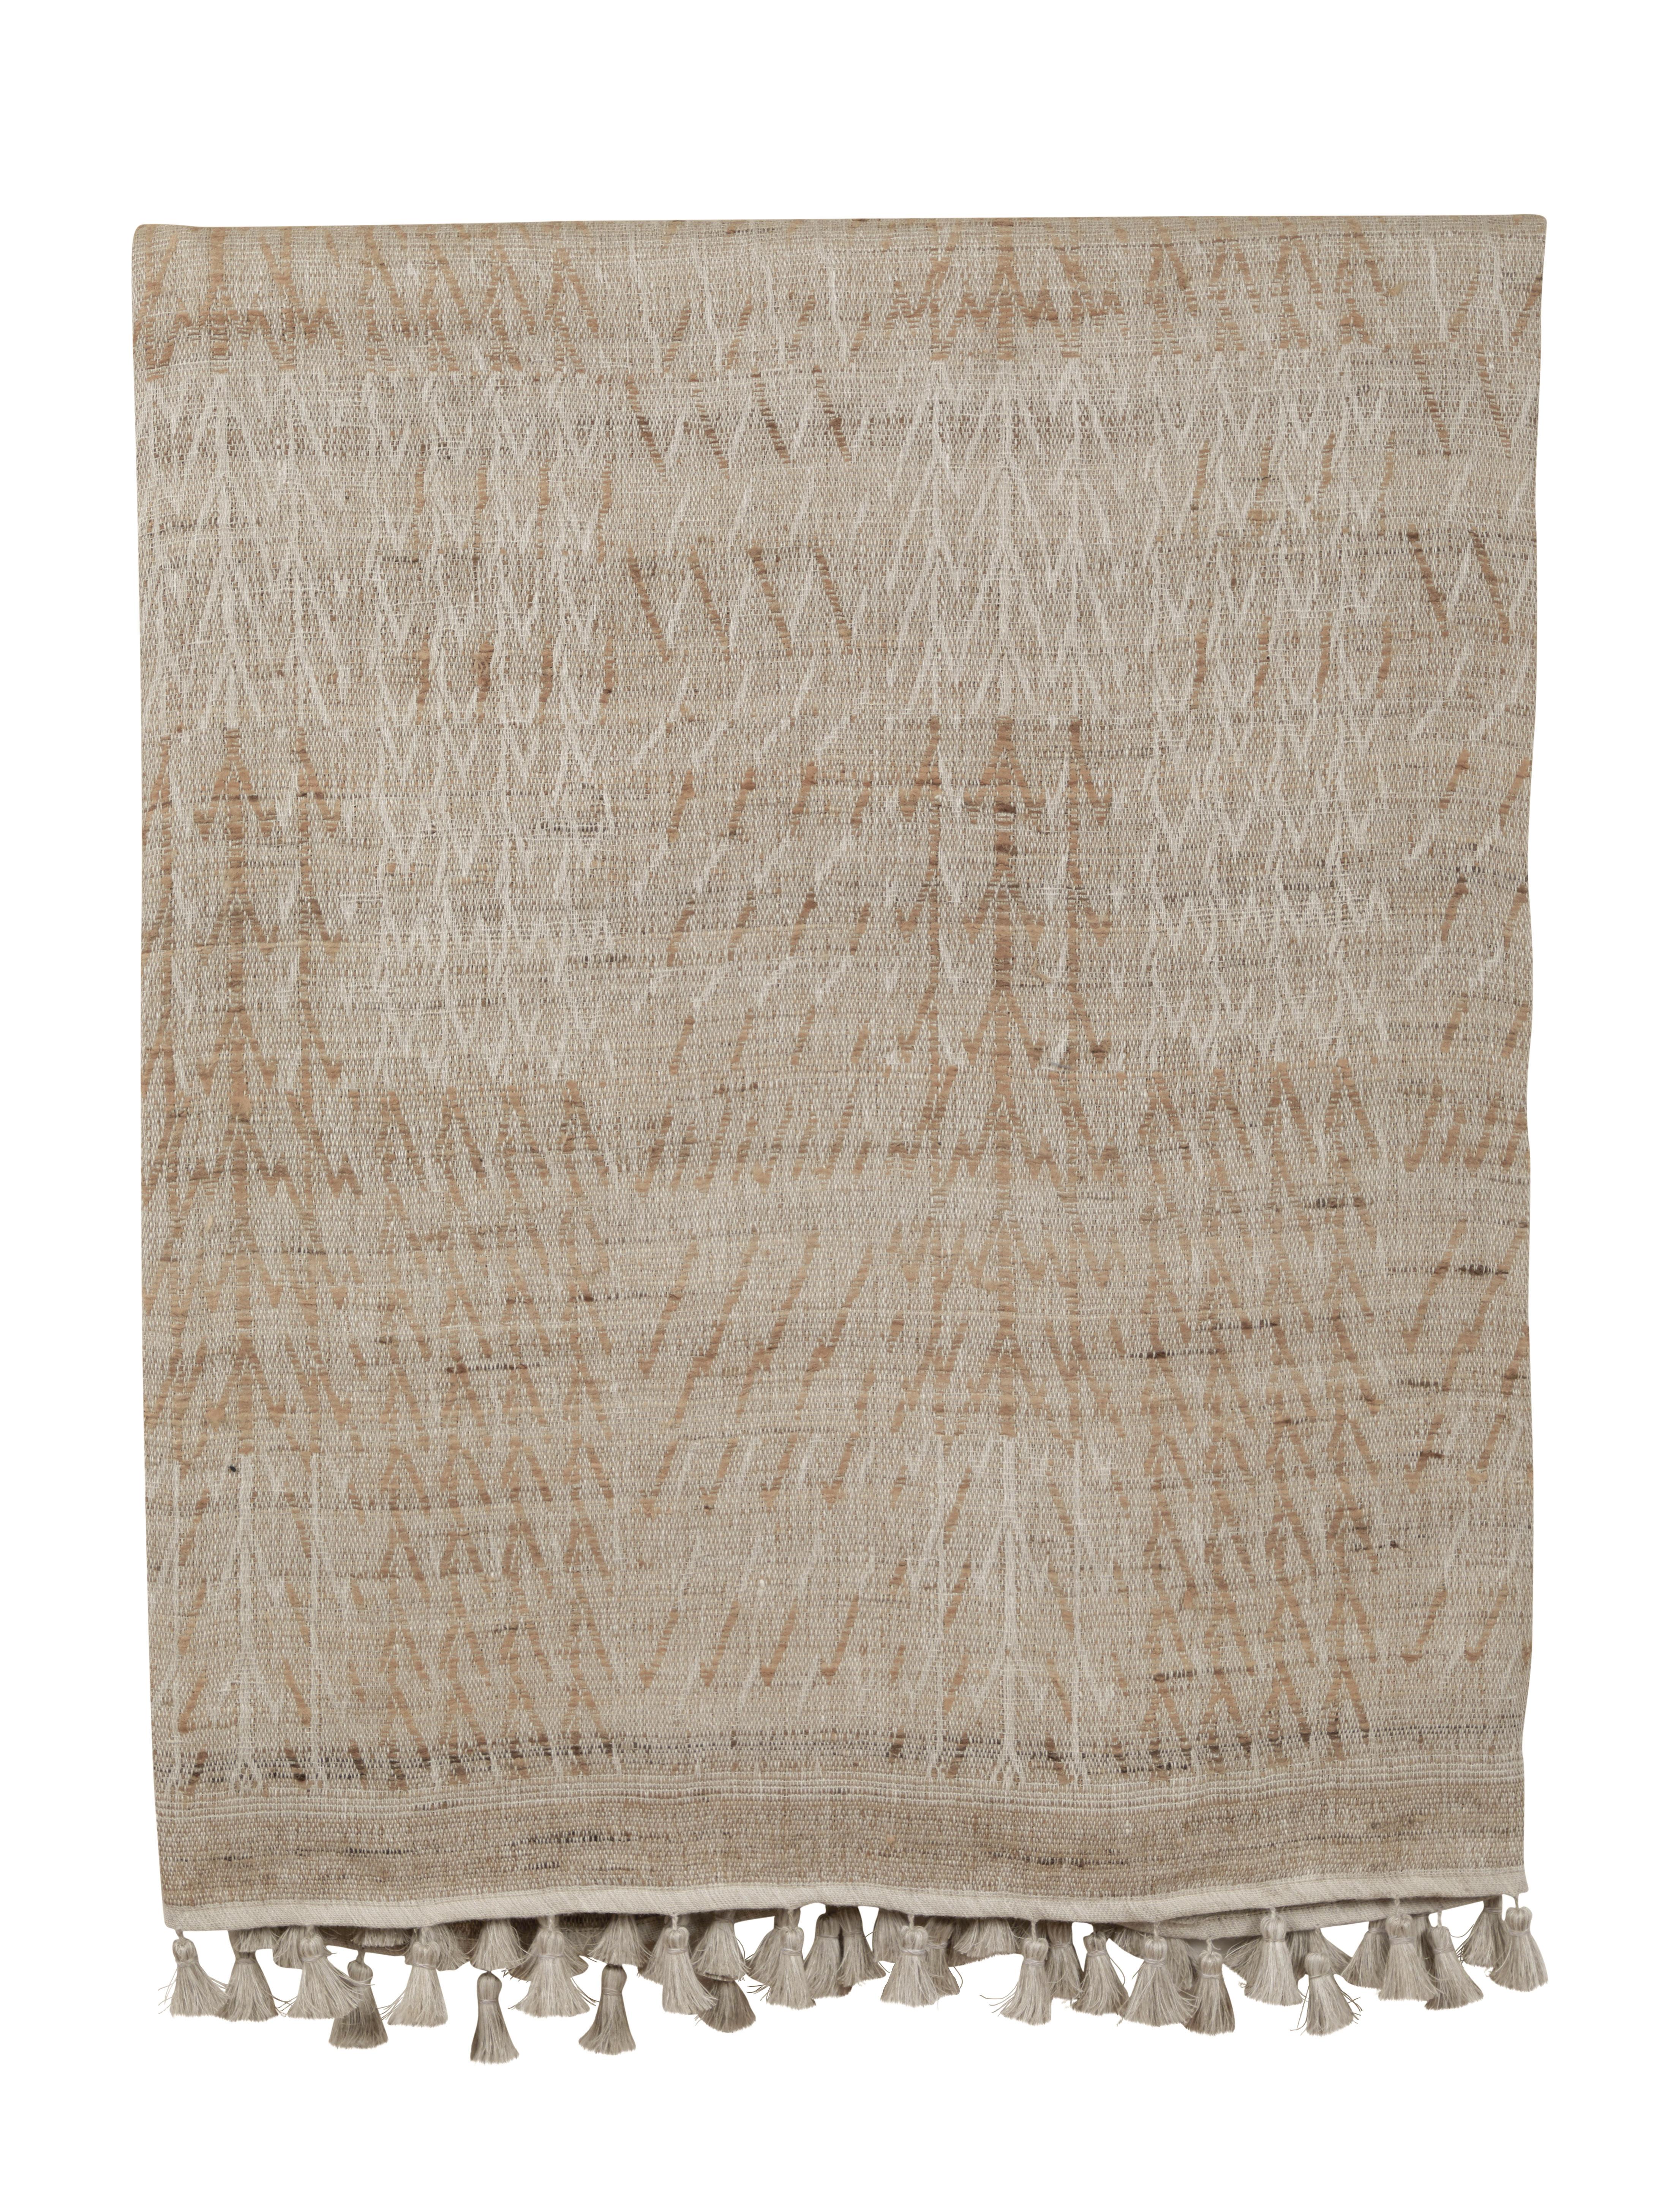 A contemporary line of cushions, pillows, throws, bedcovers, bedspreads and yardage handwoven in India on antique Jacquard looms. Handspun wool, cotton, linen, and raw silk give the textiles an appealing uneven quality.  The above bedcover is raw